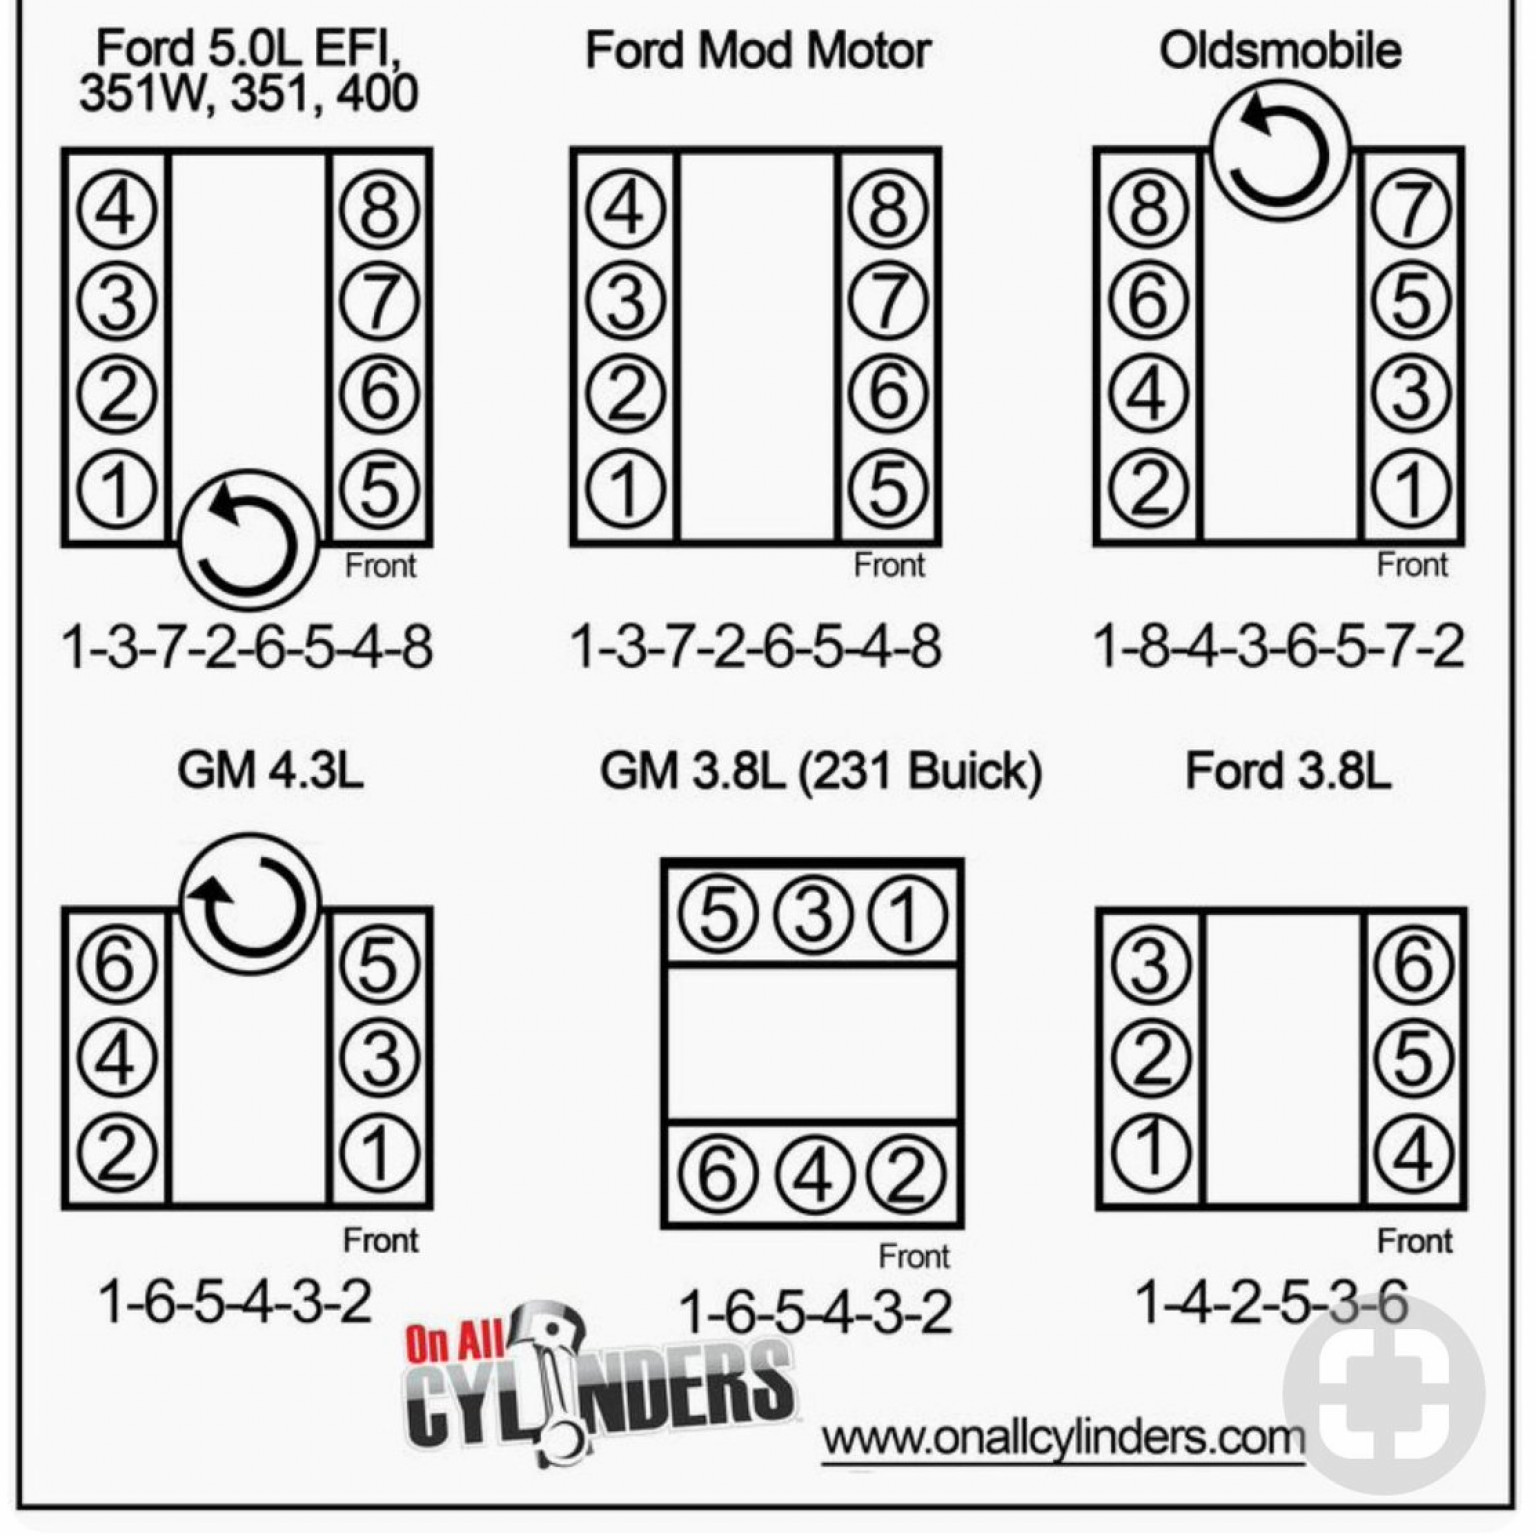 Cfbcf Chevy Small Block Firing Order Manual | Wiring Library | Wiring